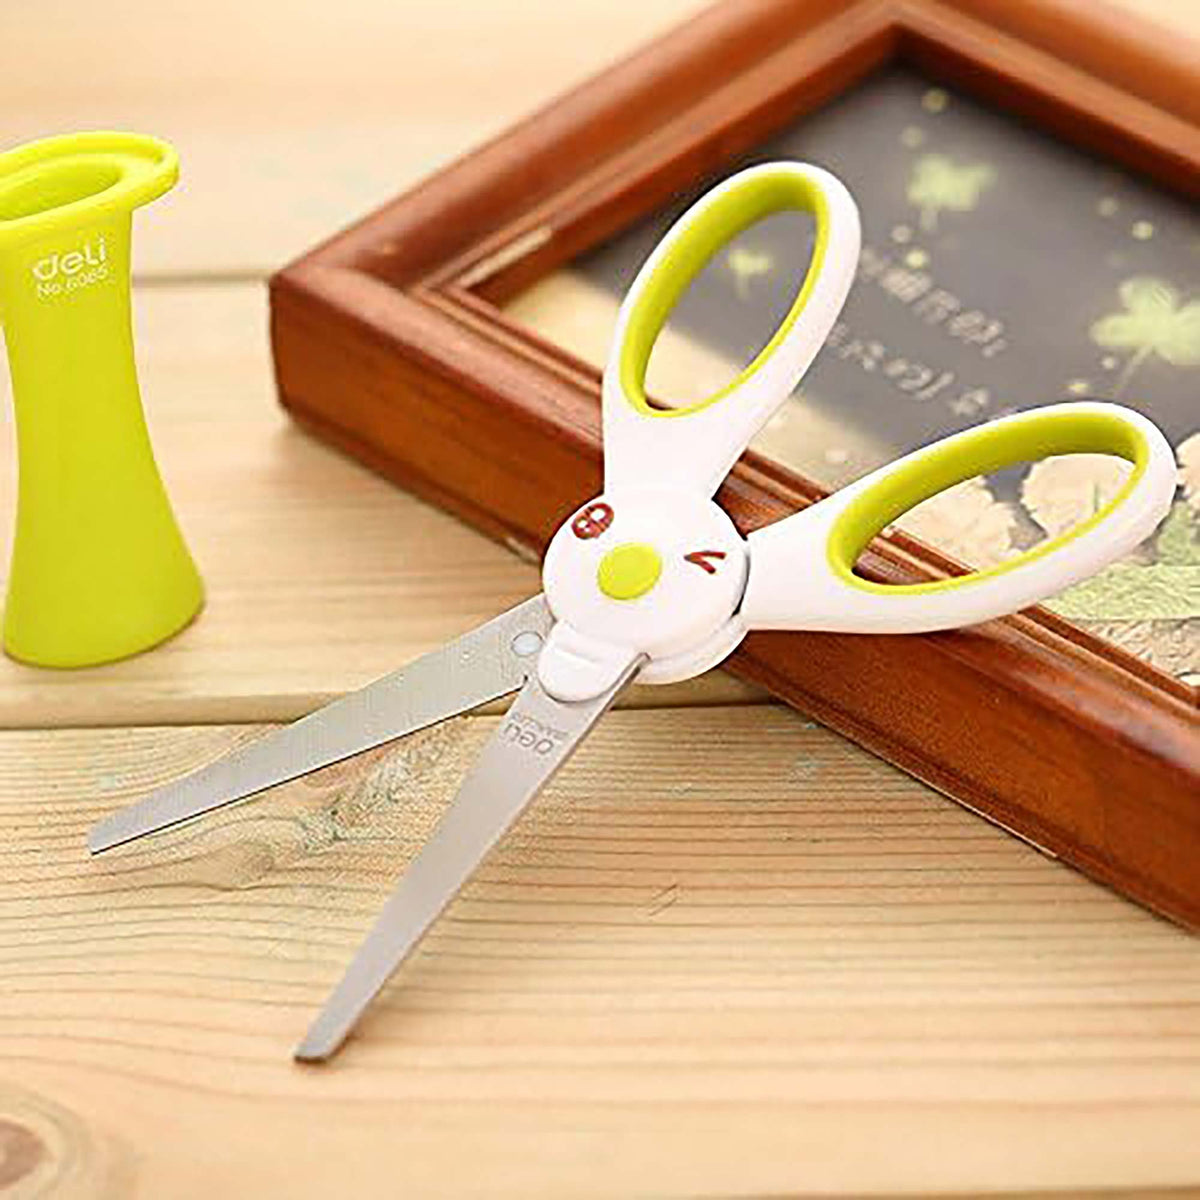 Rabbit-Shaped Handheld Scissors with Stand - Compact and Fun (Green)